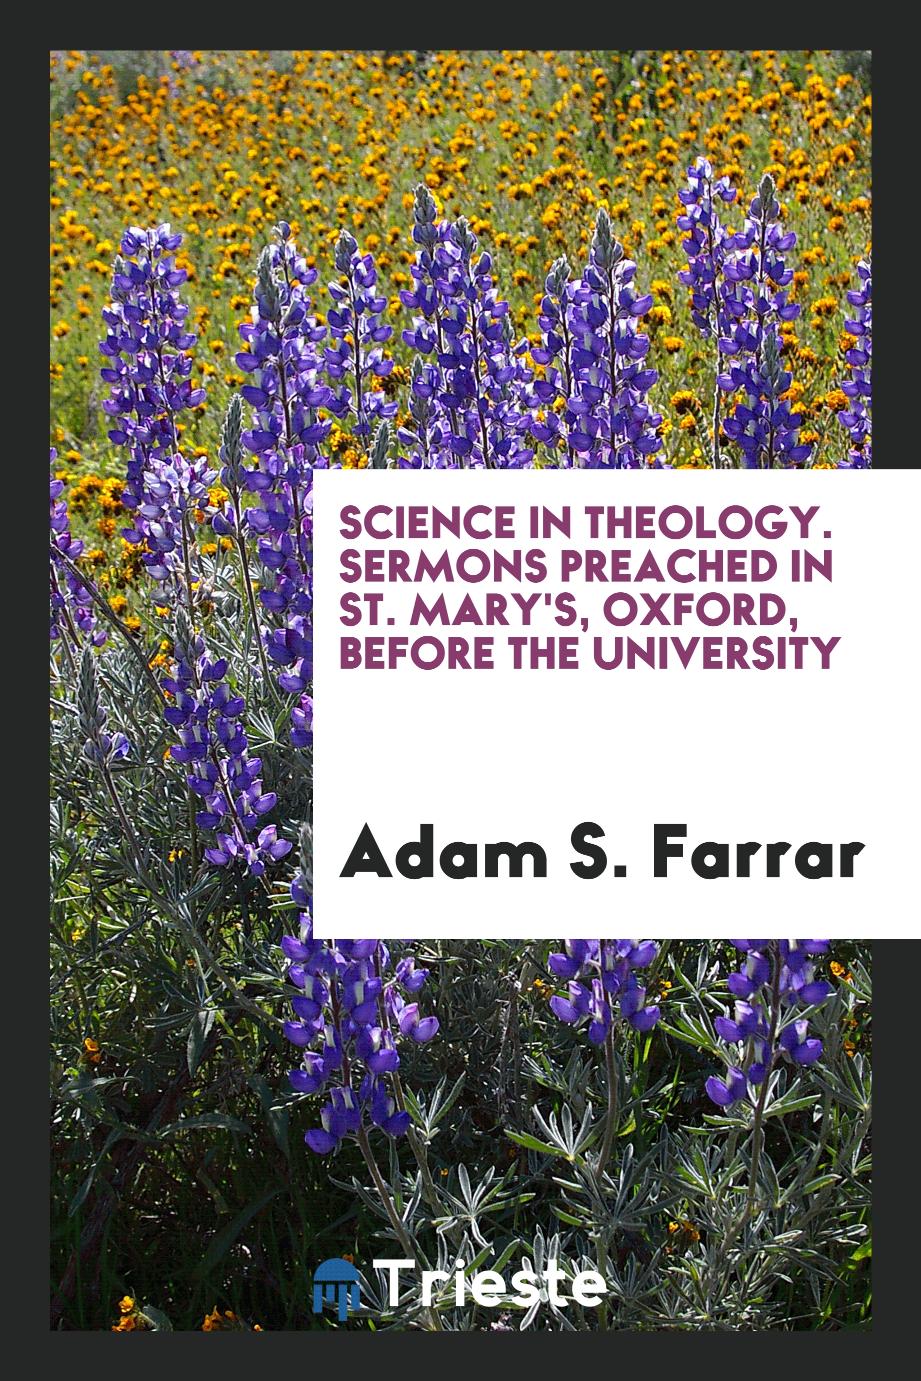 Science in theology. Sermons preached in St. Mary's, Oxford, before the university